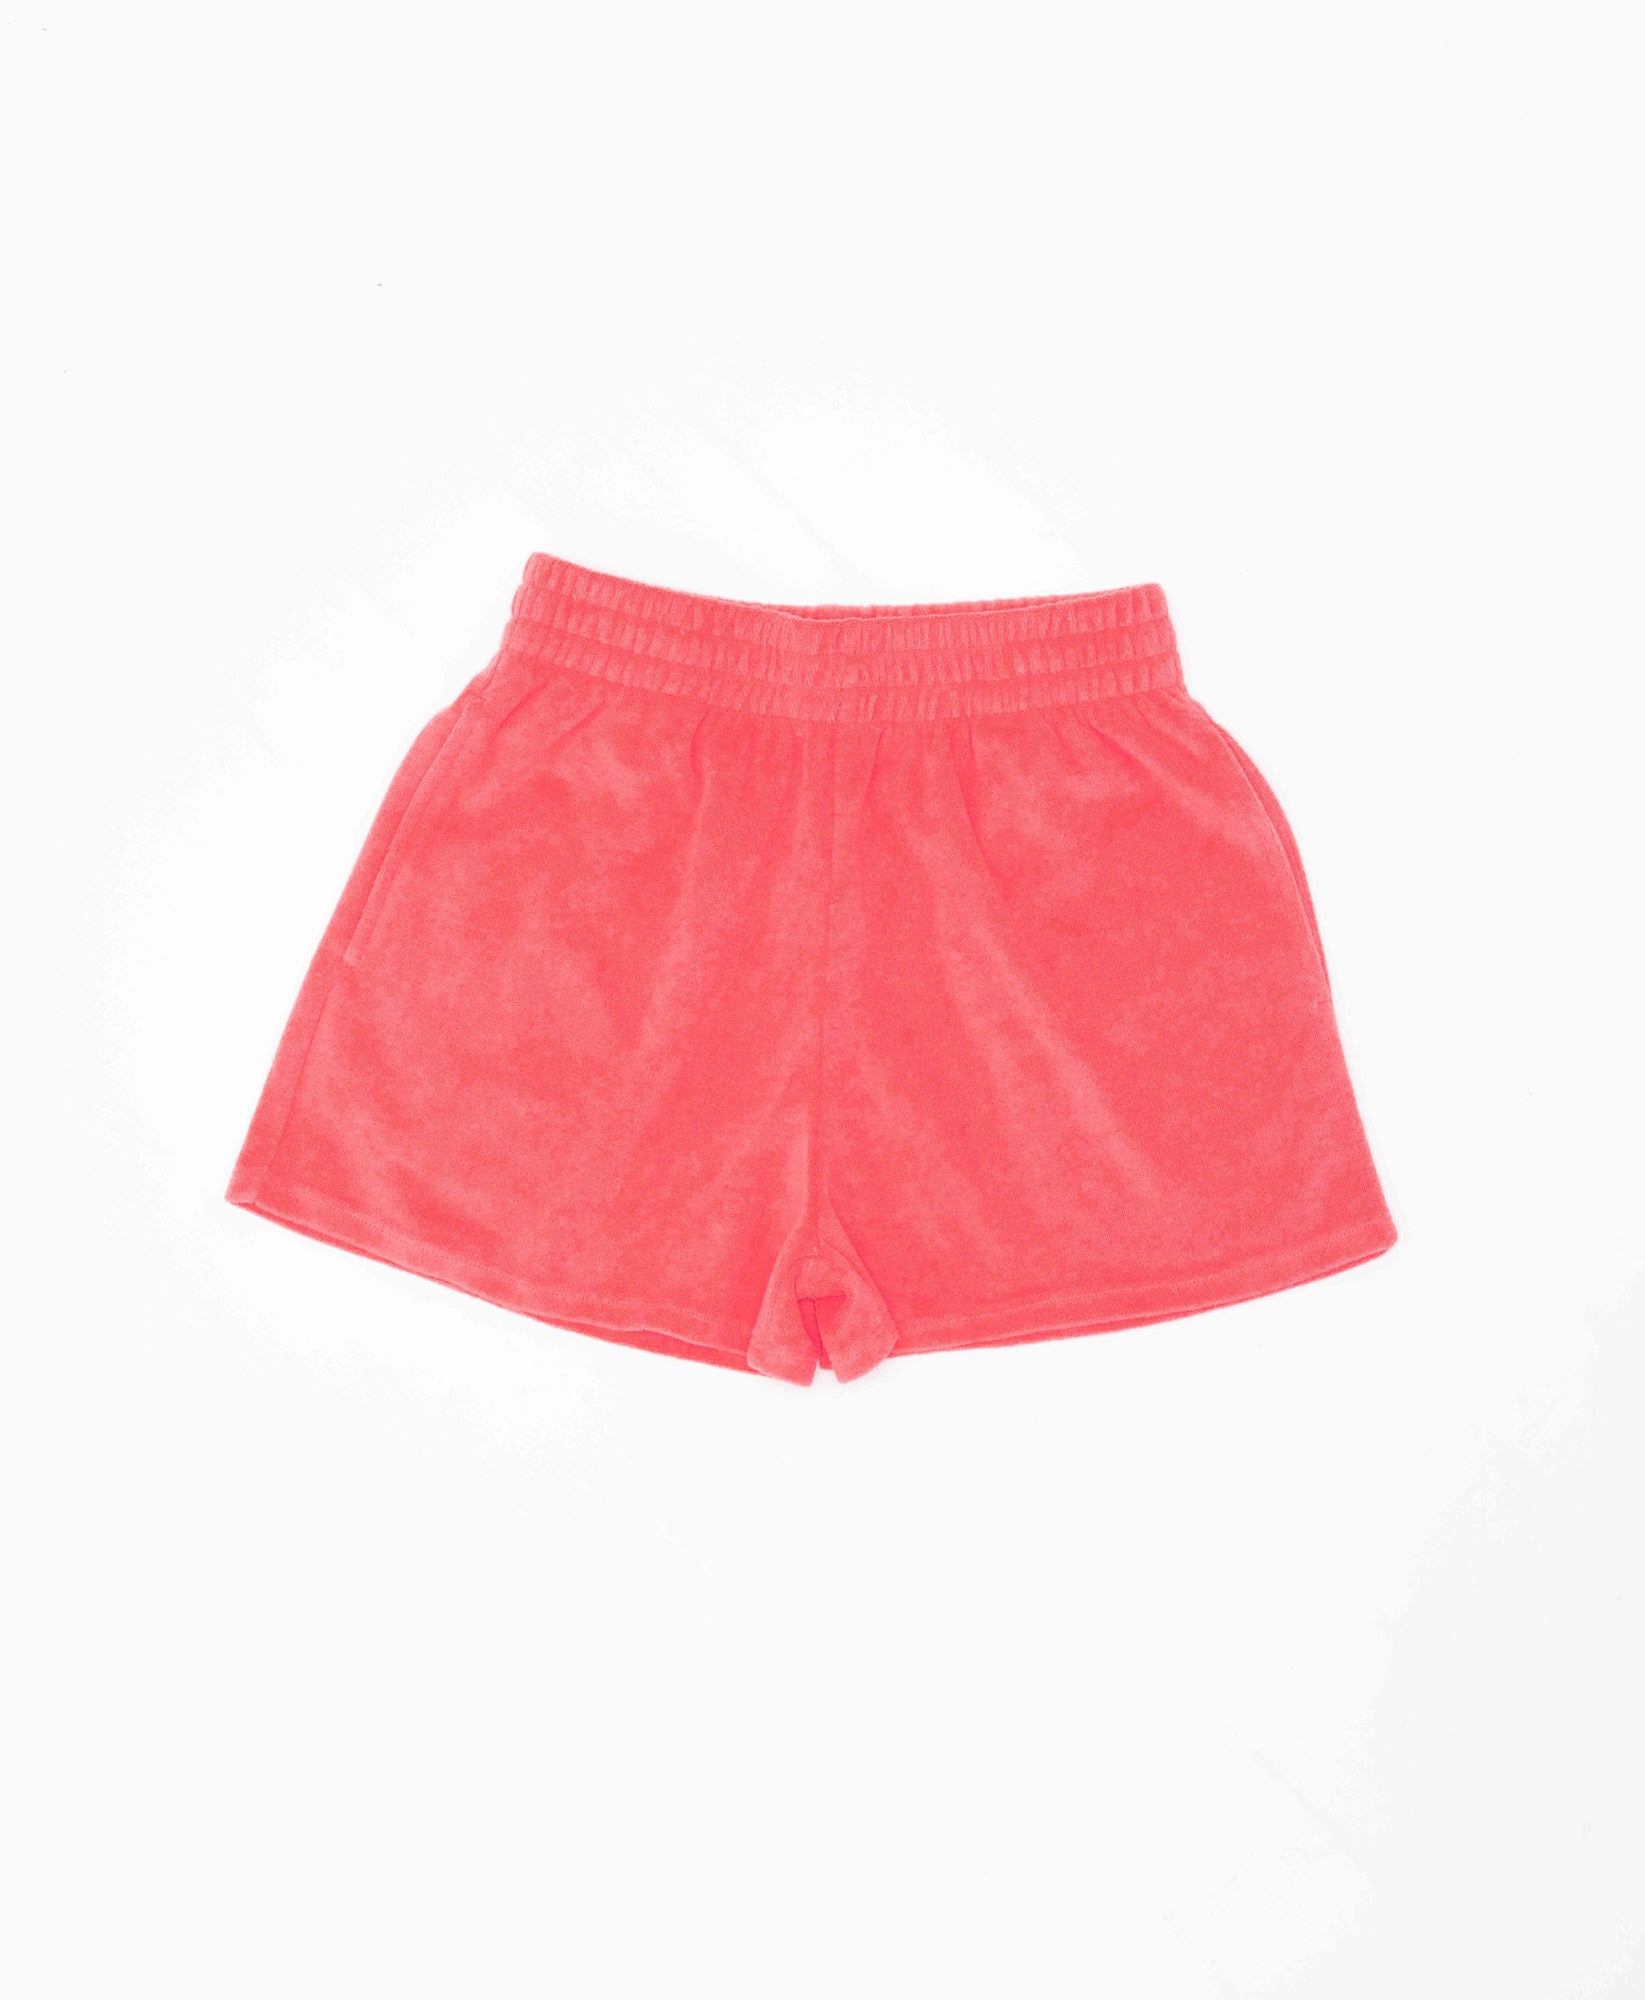 Wear One's At Aqualina Terry Cloth Shorts in Aperol Pink Flat Front